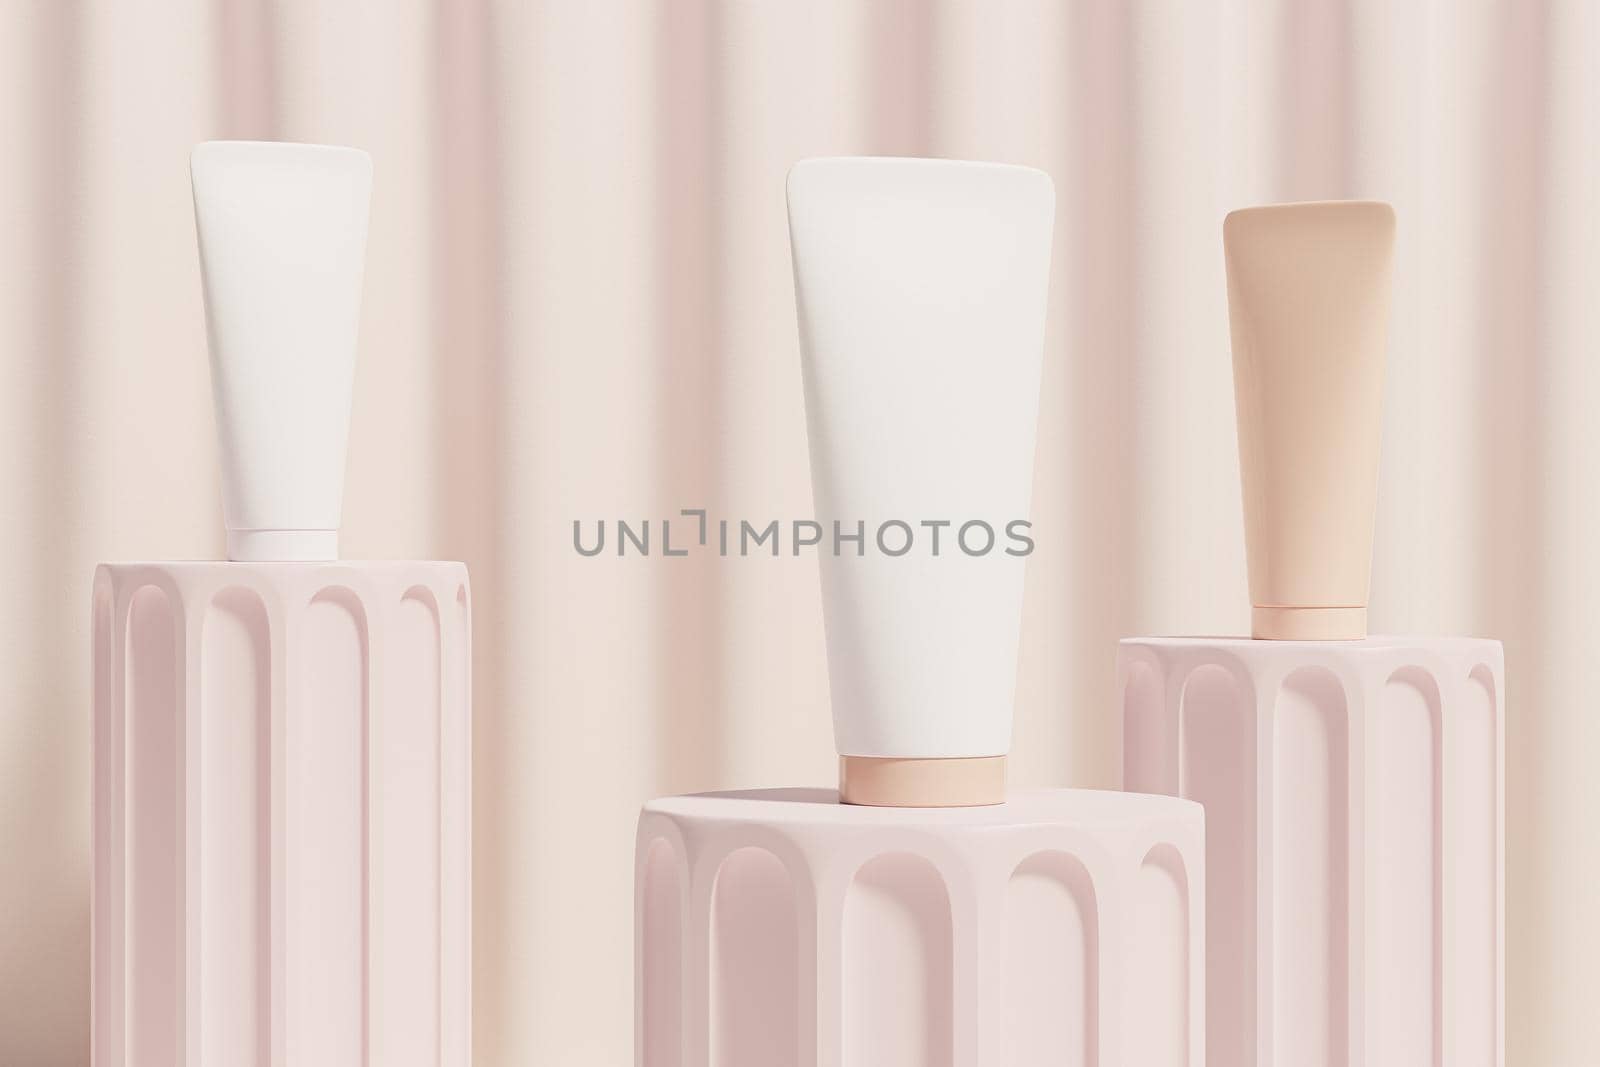 Mockup tube for cosmetics products, template or advertising on pillar podiums, beige background, 3d illustration render by Frostroomhead